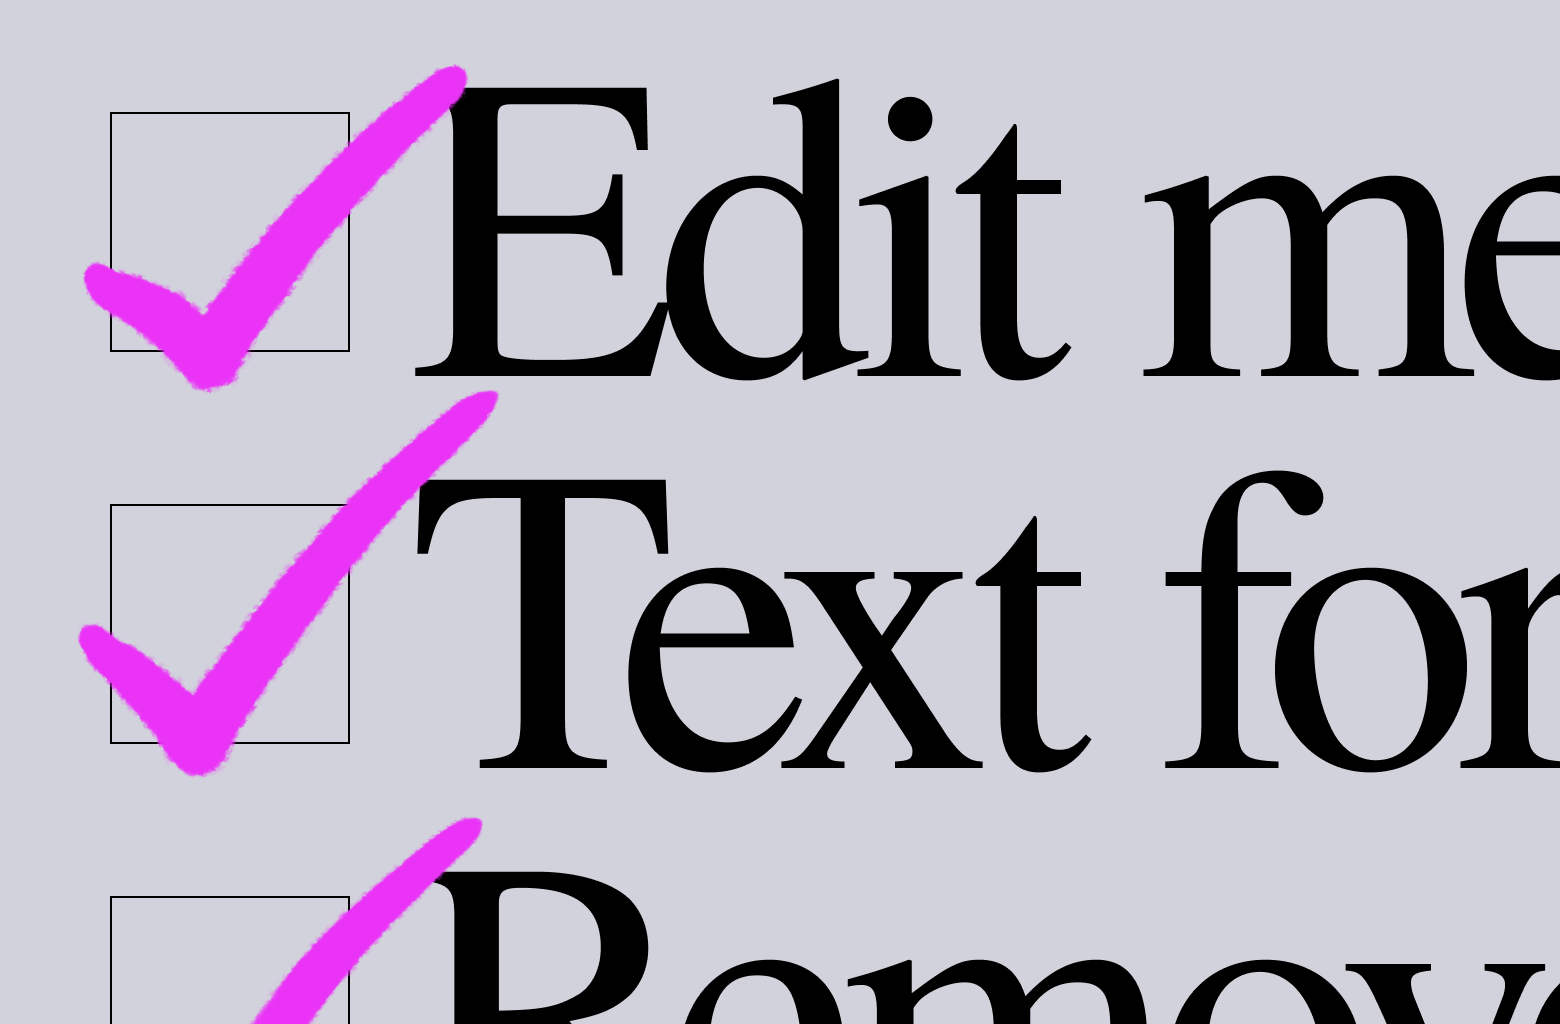 A stylized close up checklist with pink checkmarks on a gray background. The truncated text of the checklist reads "Edit me," "Text for," and "Remove."